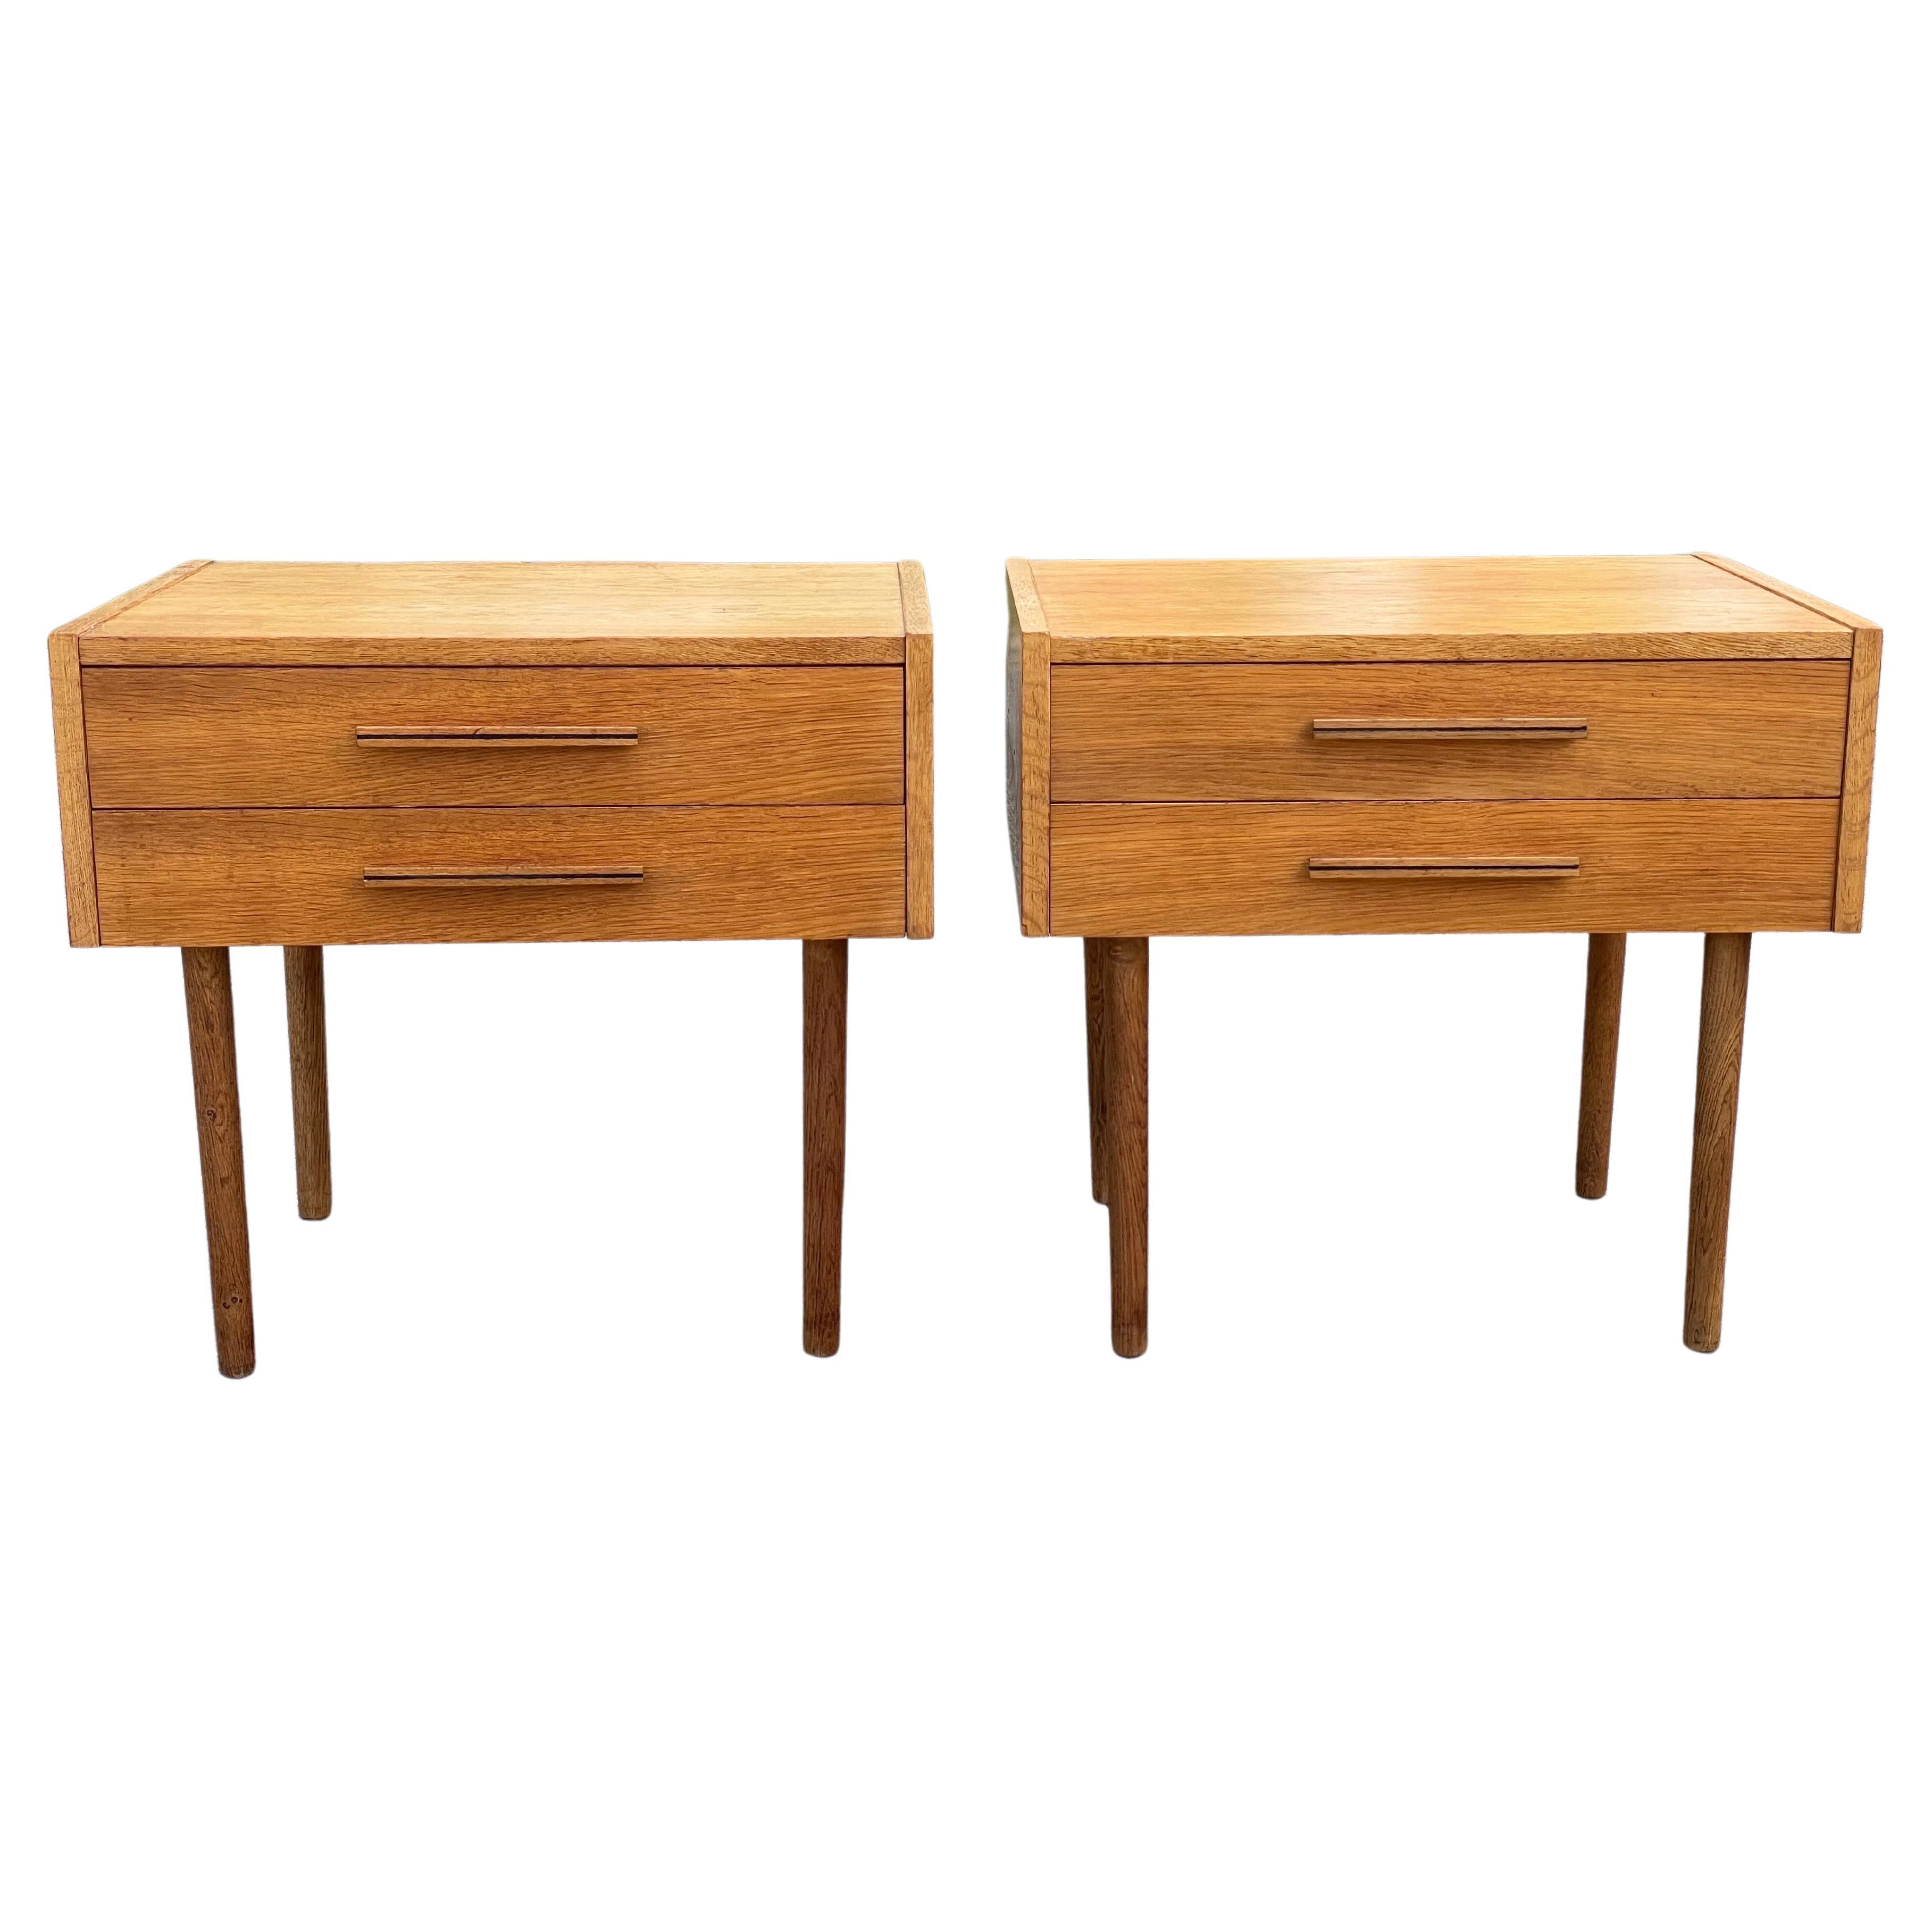 Set of Spacious Danish Mid-Century Modern Nightstands from the 1960s For Sale